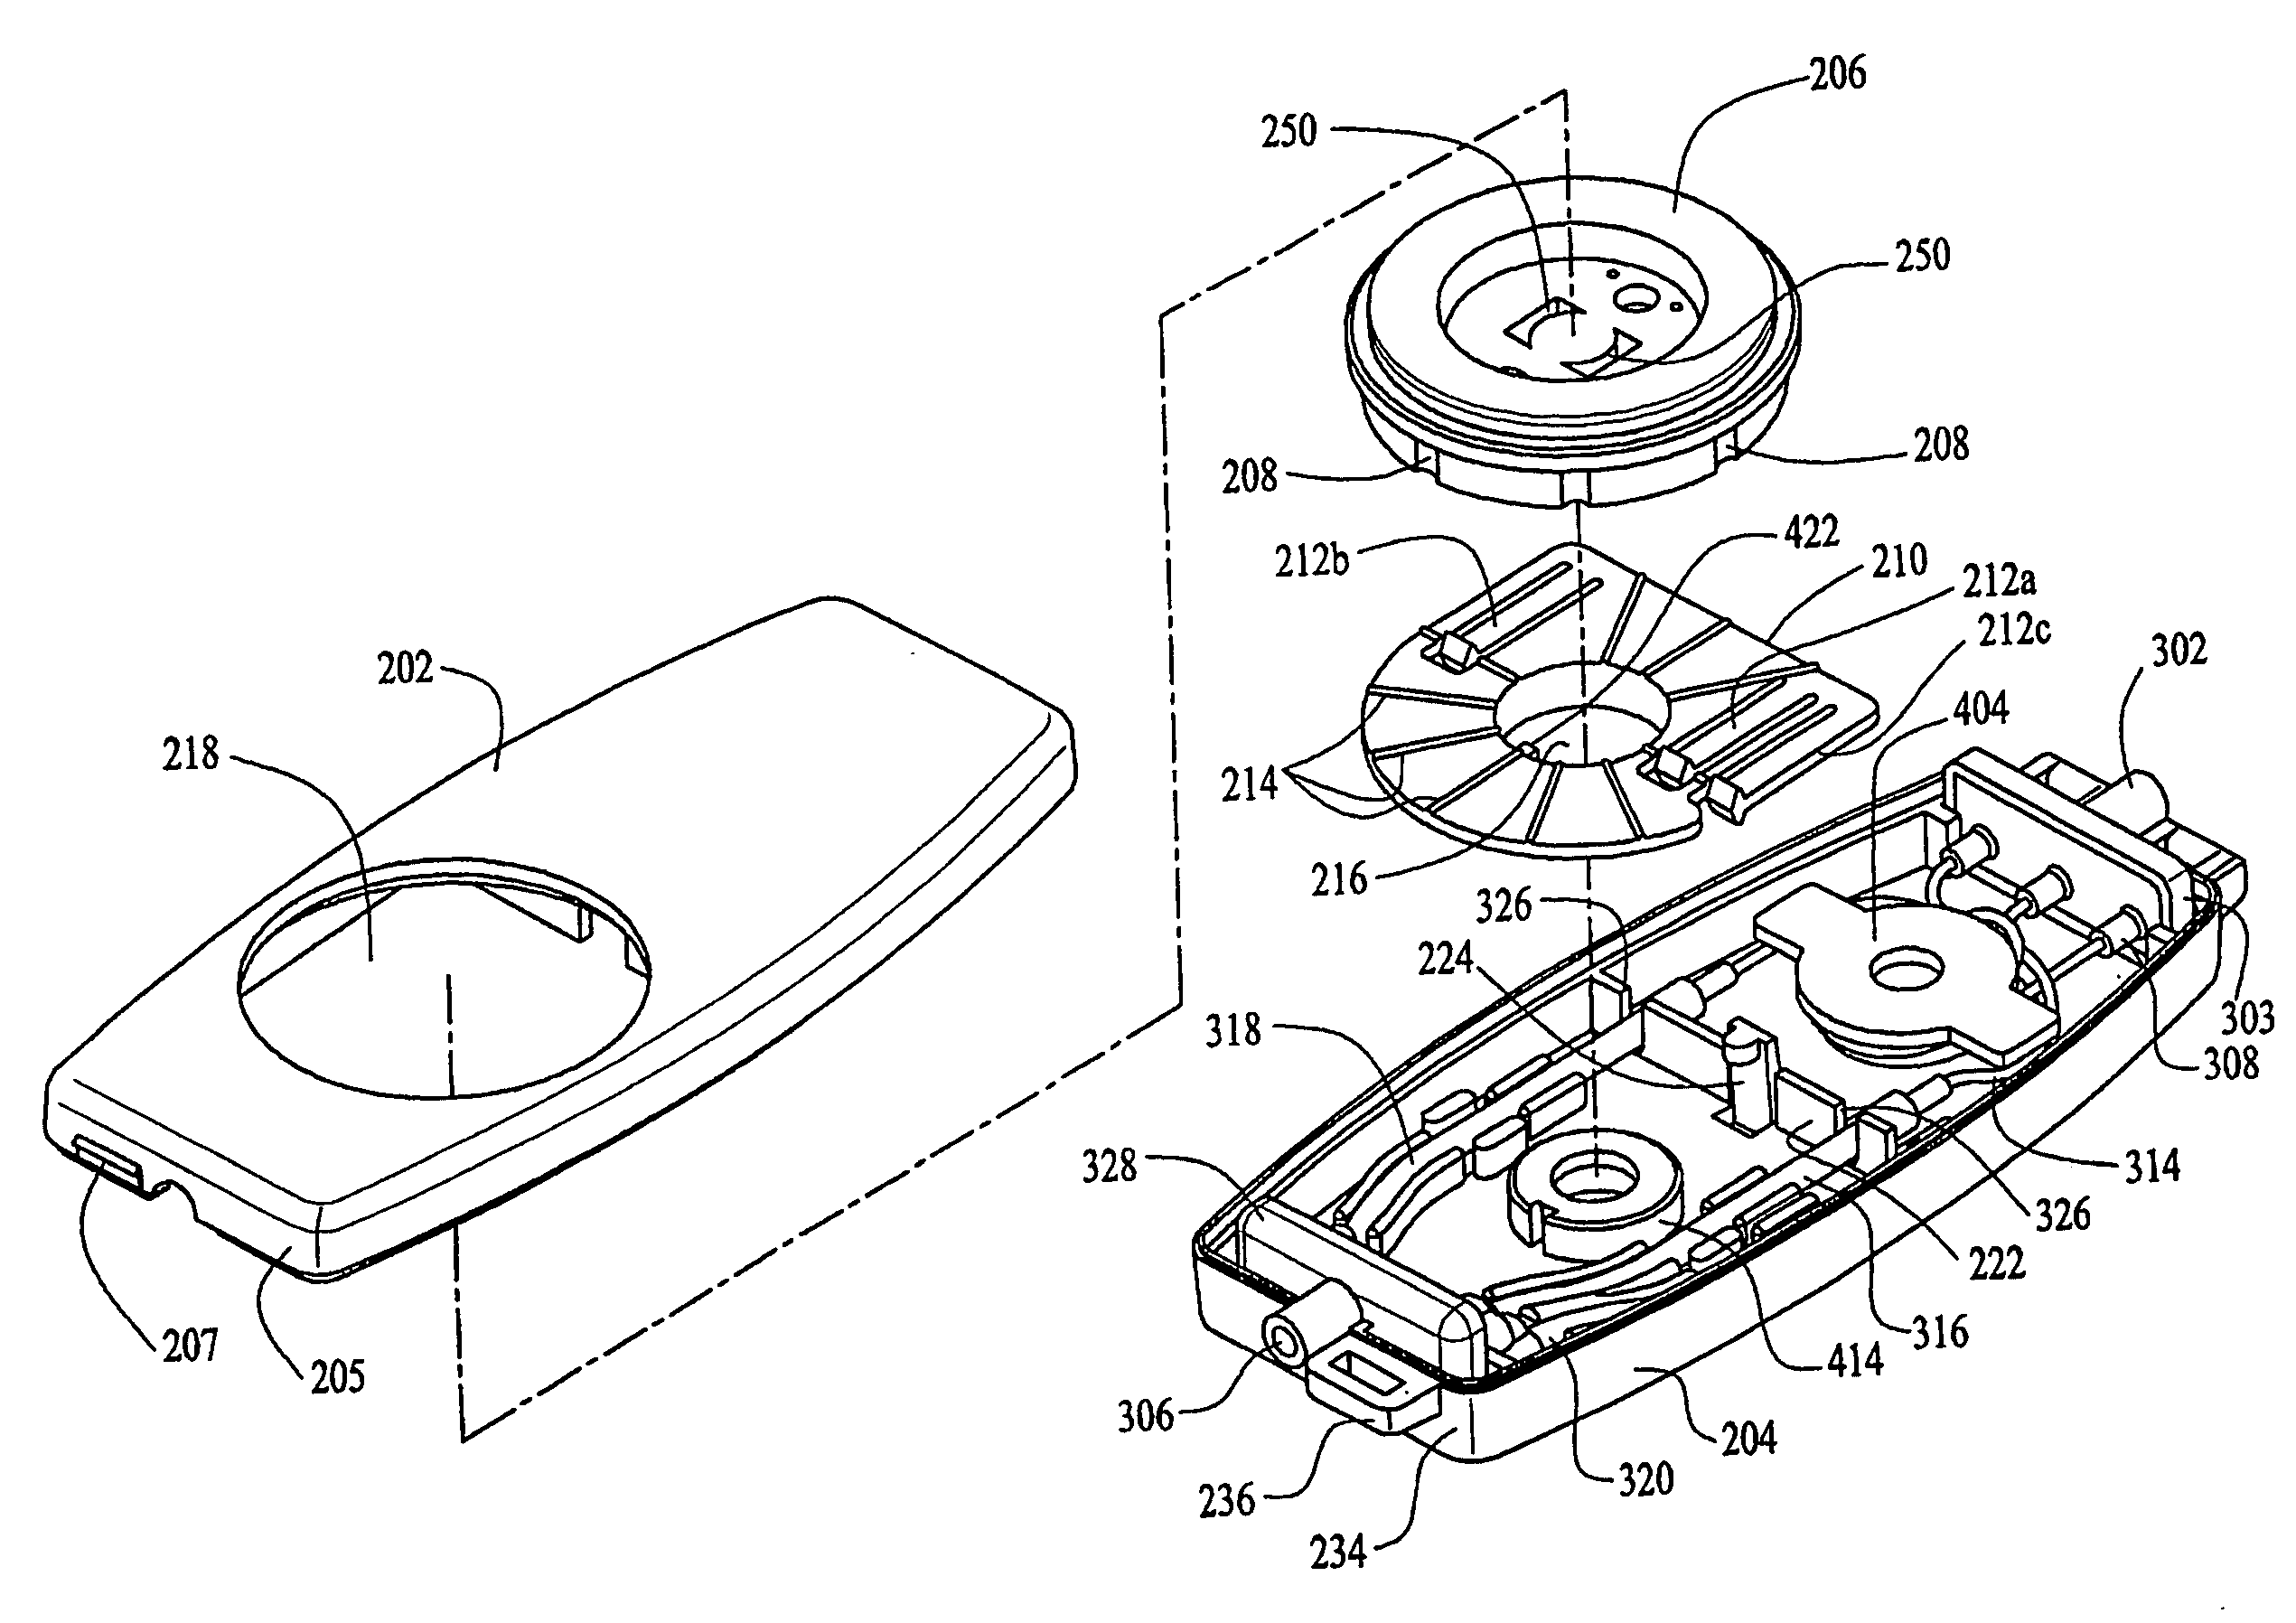 Device for selectively regulating the flow rate of a fluid